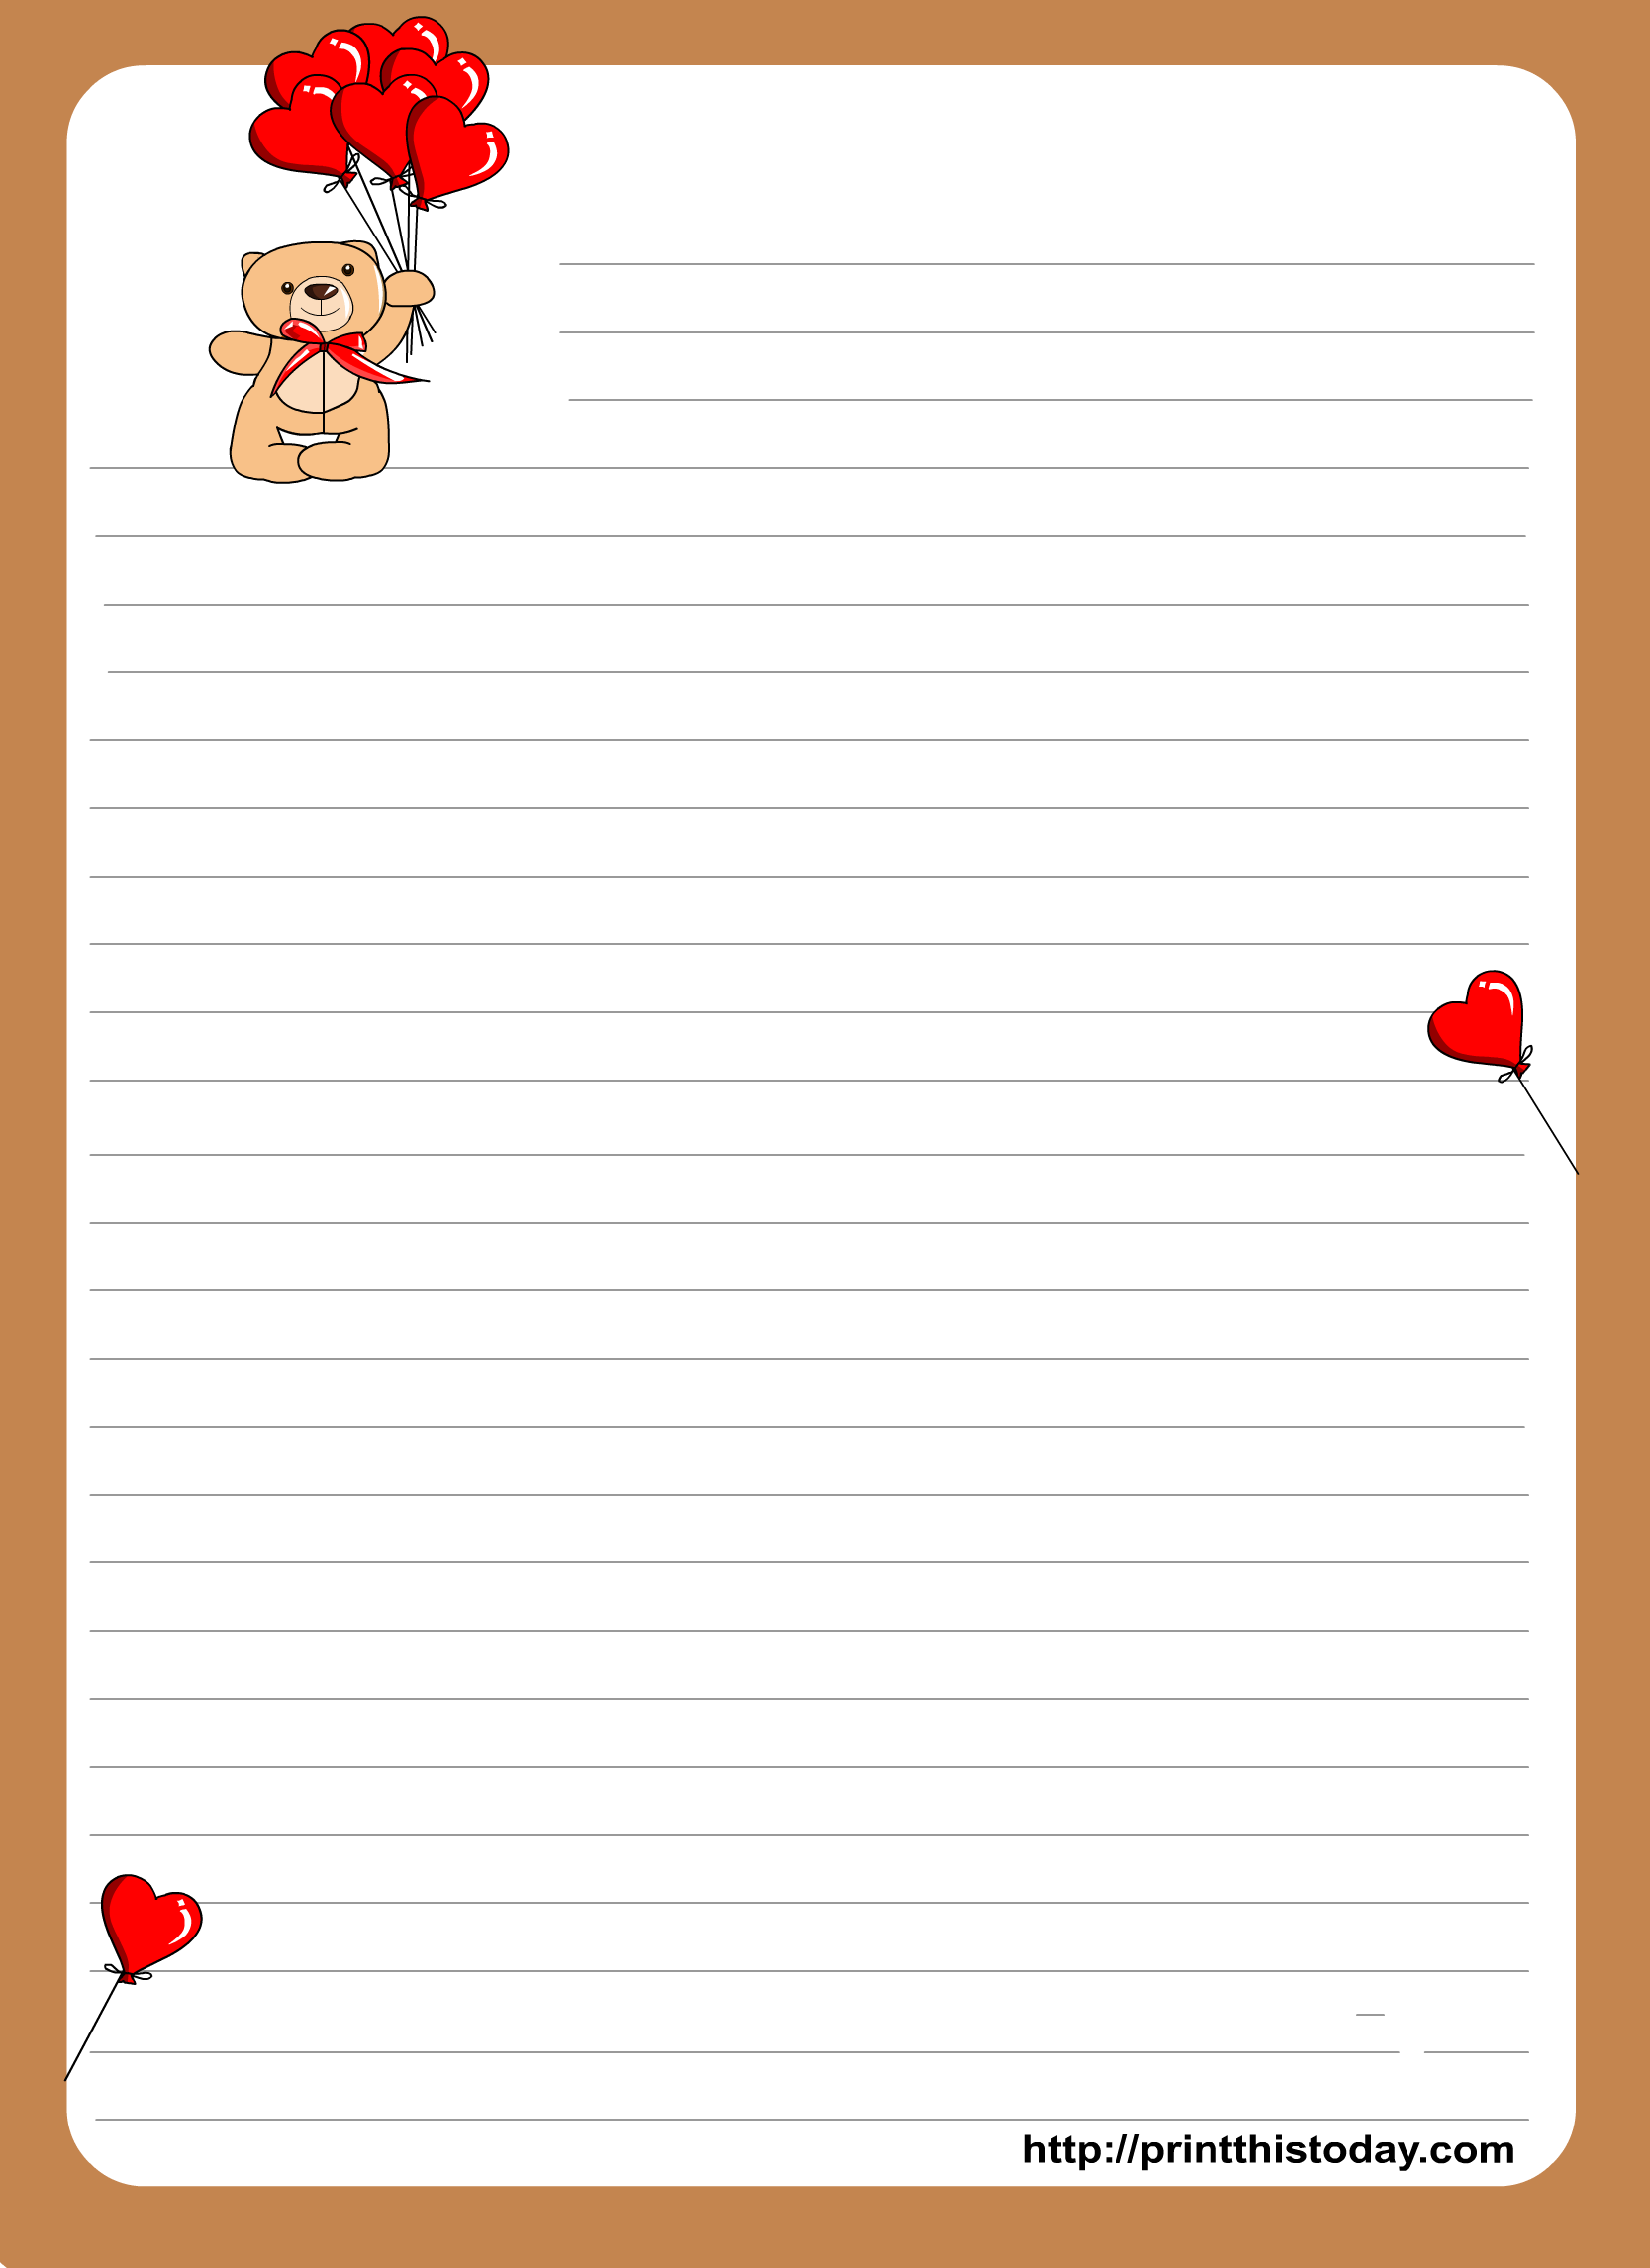 Love letter writing paper   print this today, more than 